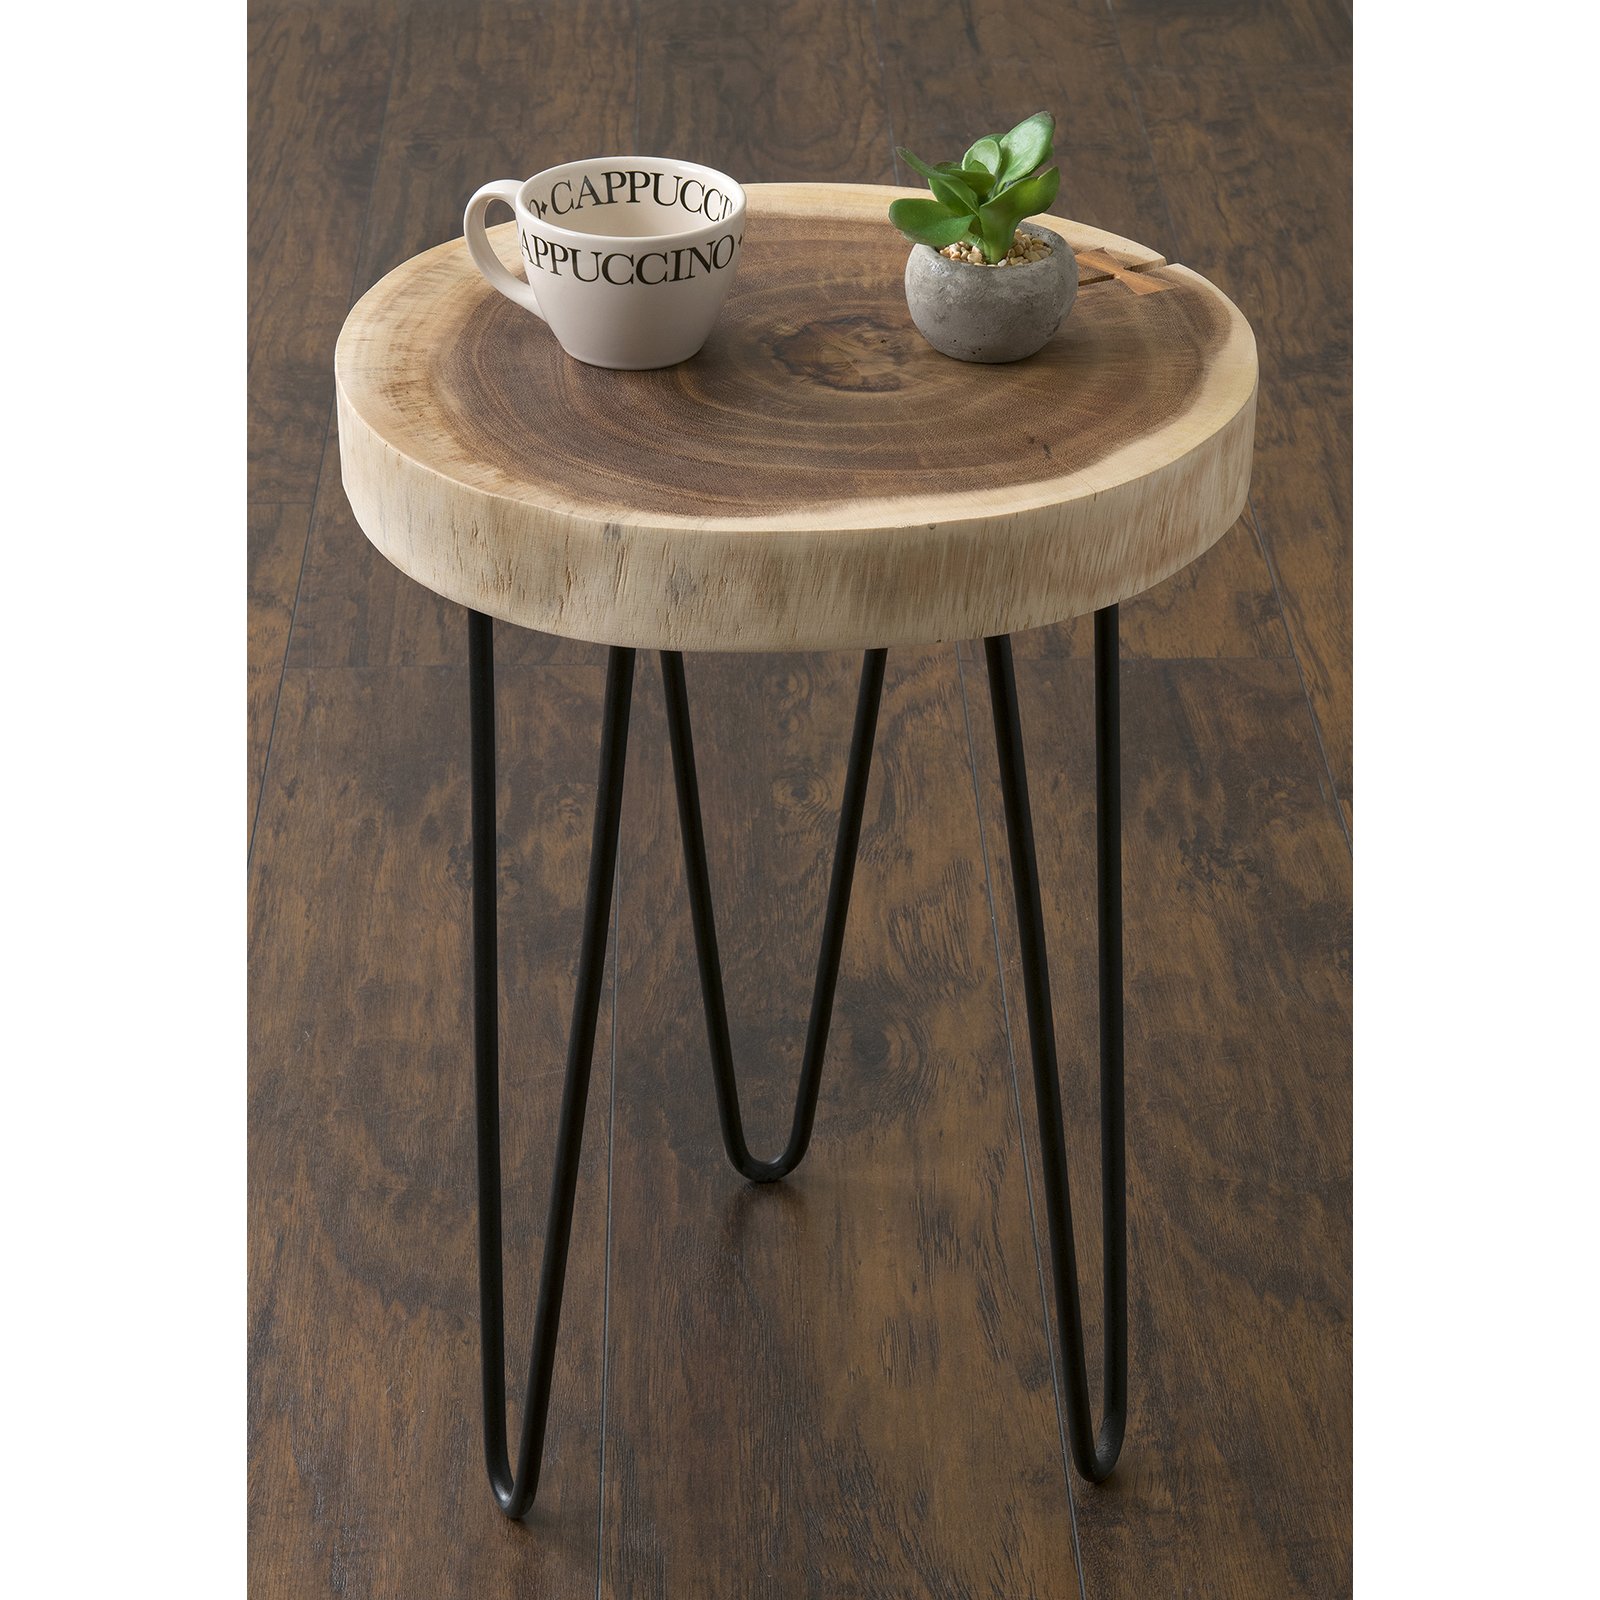 carbon loft julia brown teakwood round accent table east mains laredo free shipping today low glass coffee unfinished dining legs marilyn monroe bedroom set living room decor top